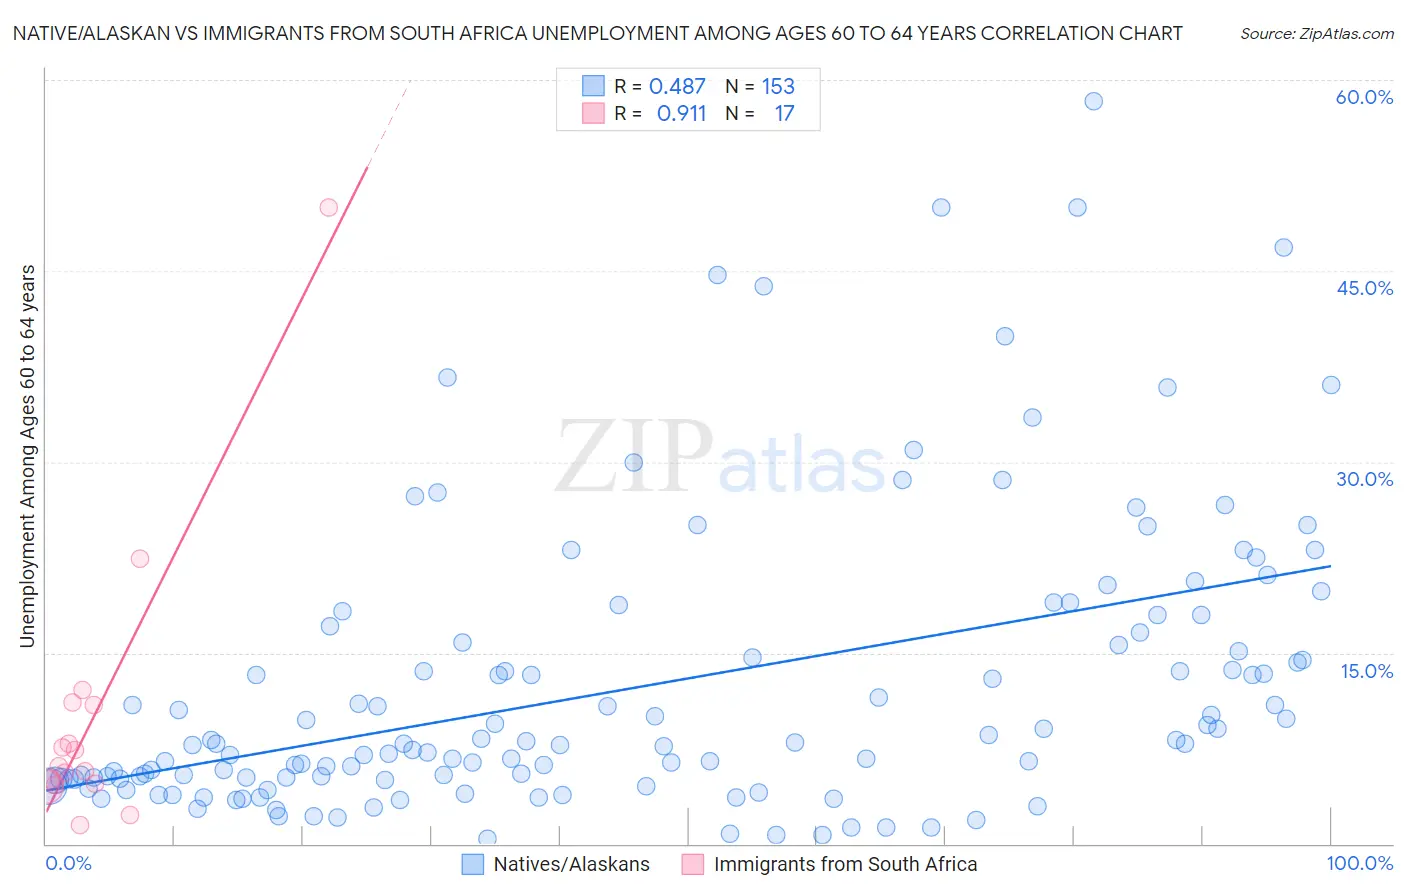 Native/Alaskan vs Immigrants from South Africa Unemployment Among Ages 60 to 64 years